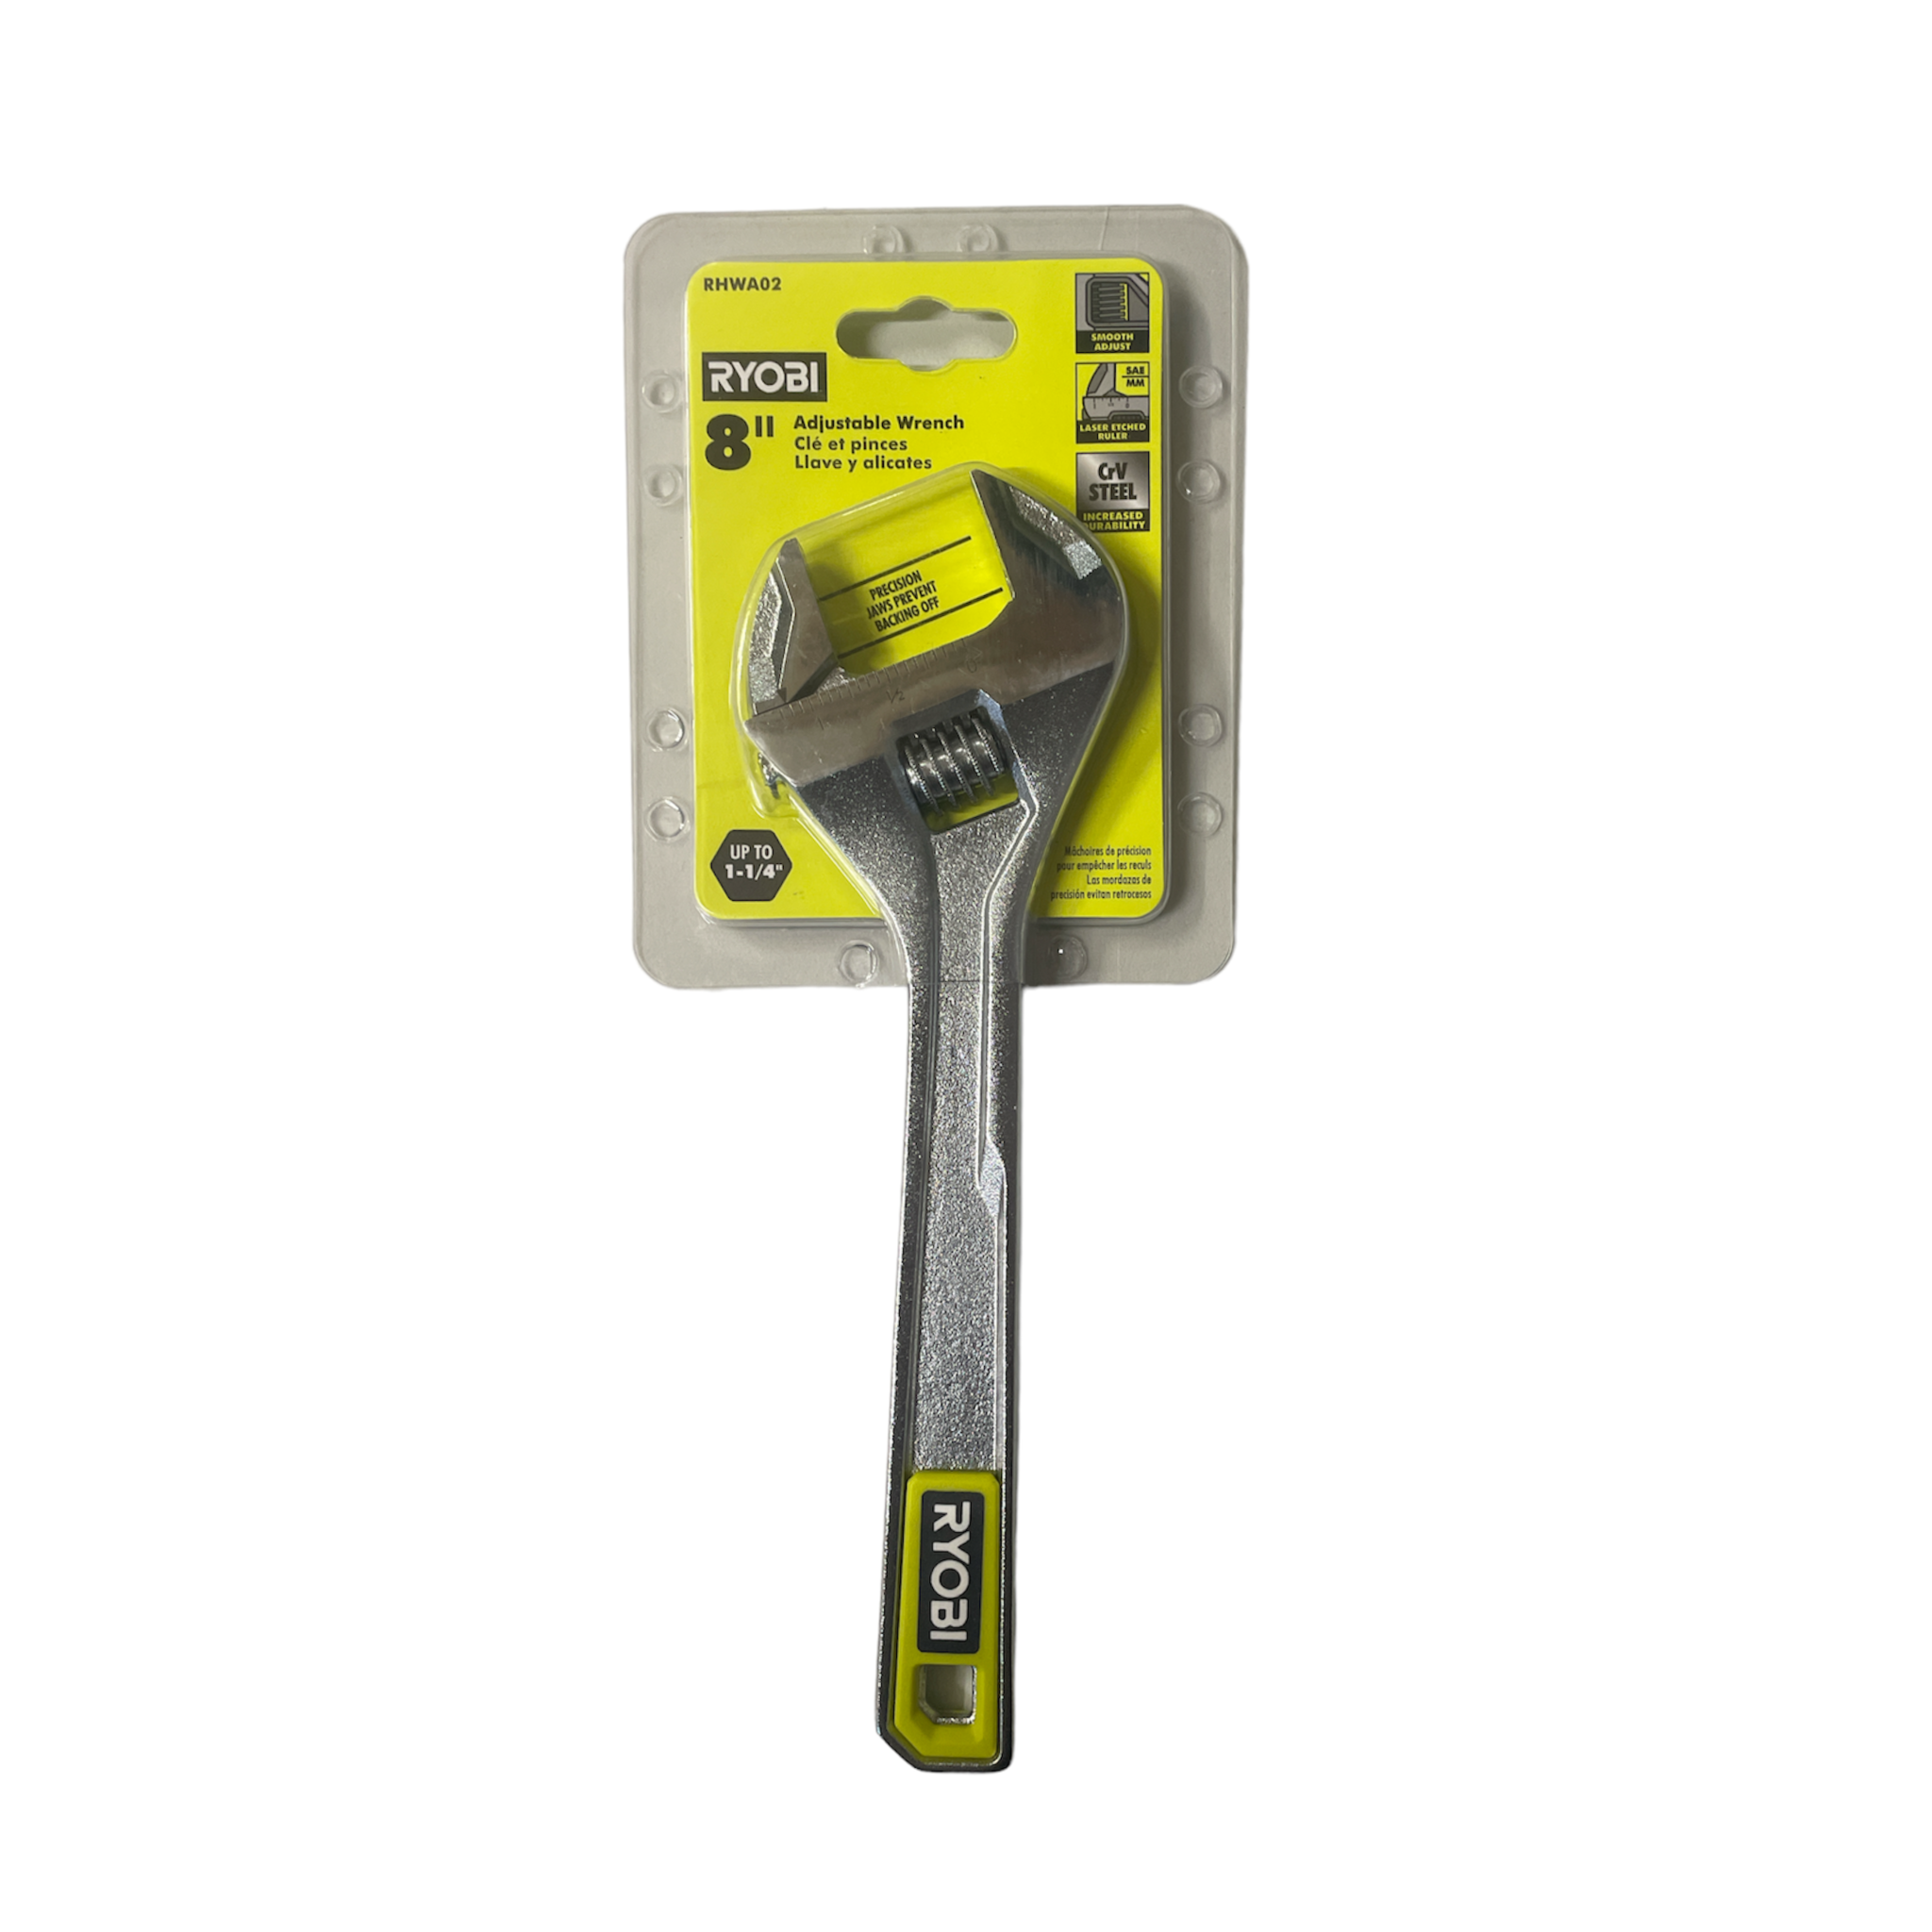 RYOBI 8 in. Adjustable Wrench